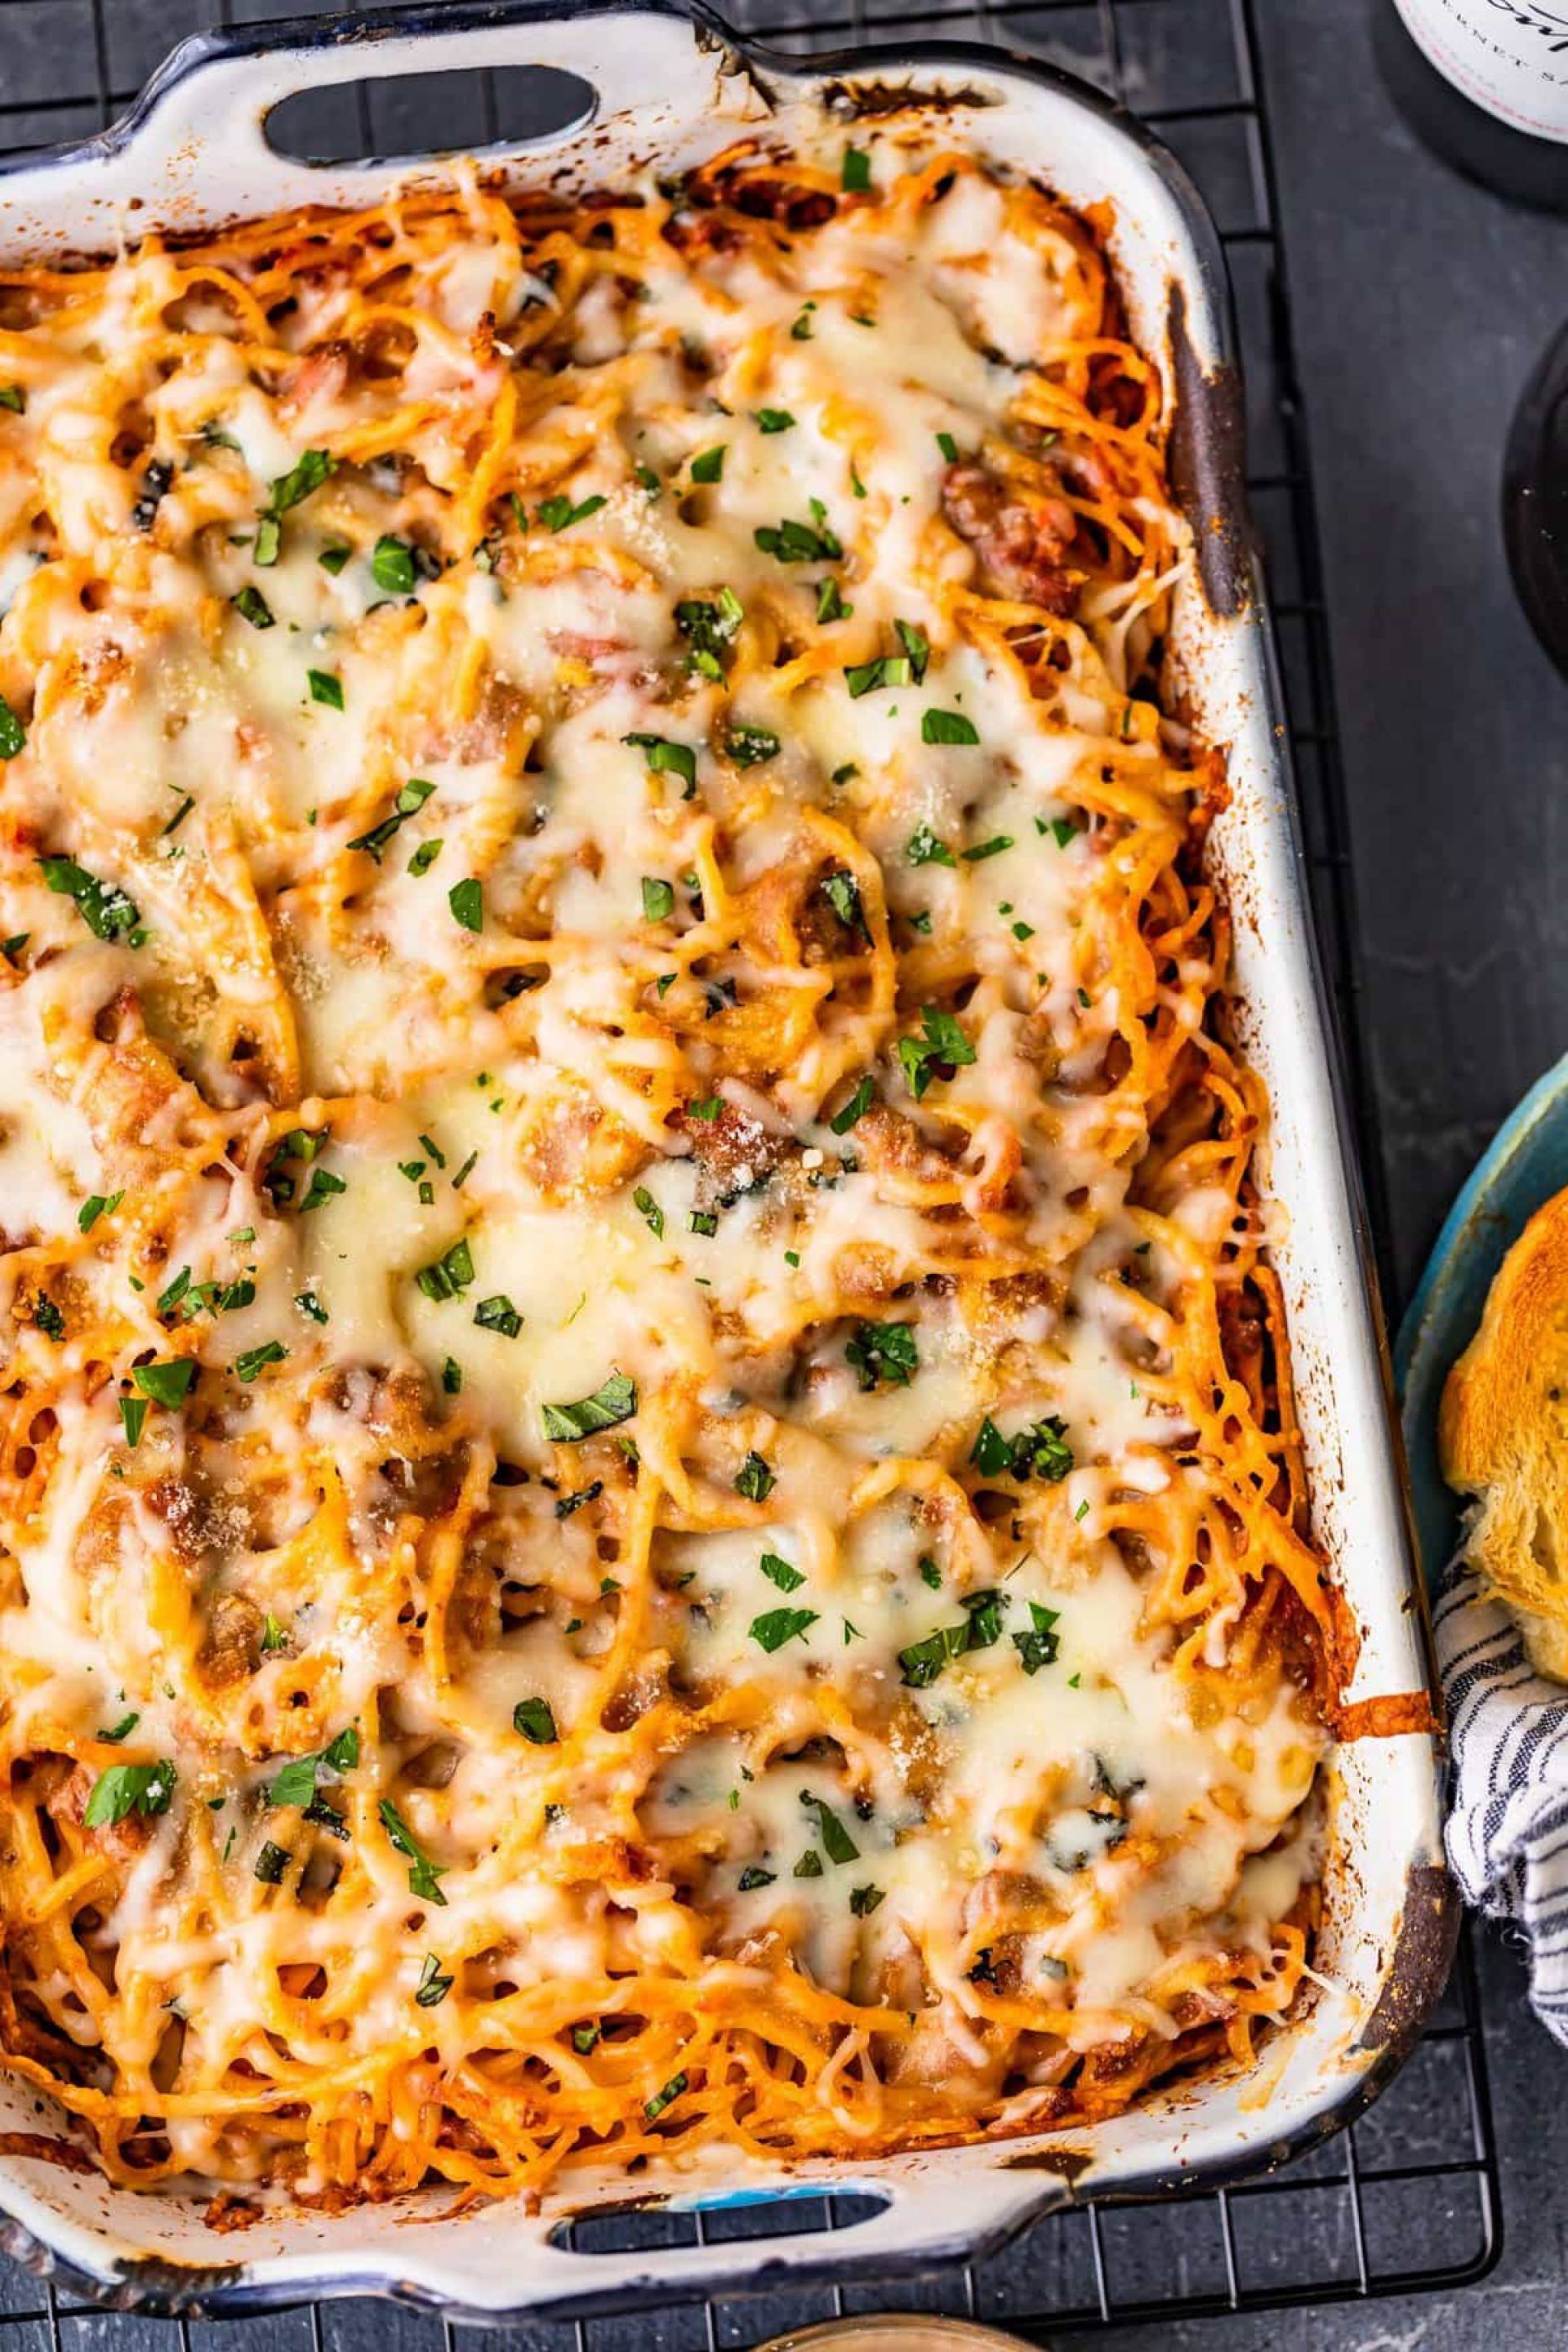 Four Cheese Baked Spaghetti Casserole and Meatballs.